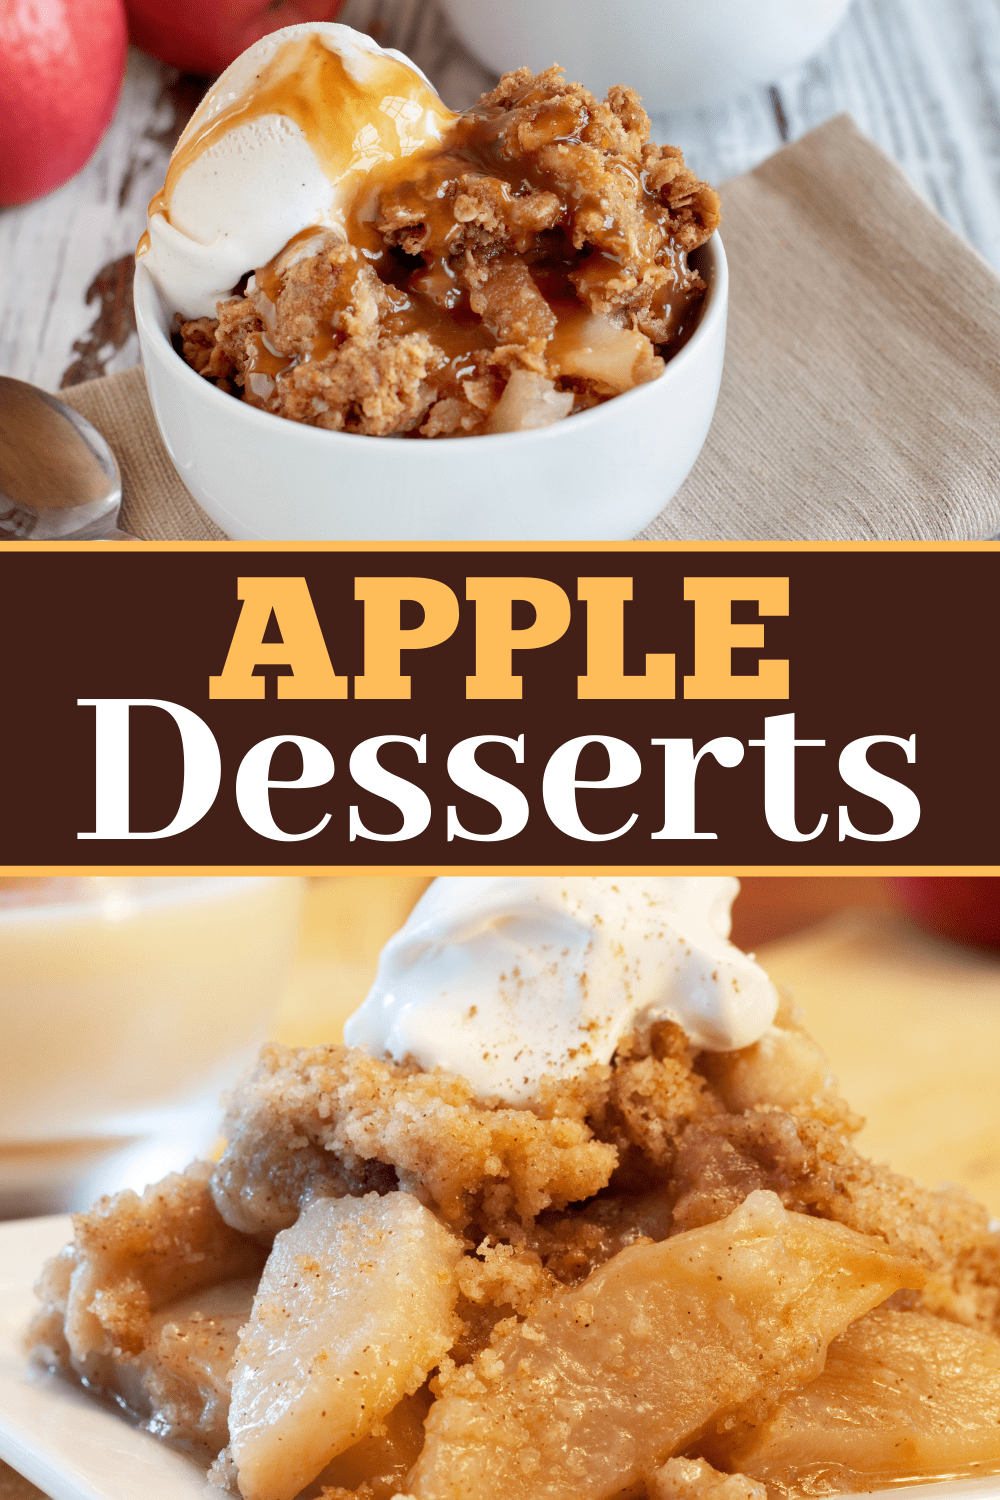 30 Easy Apple Desserts You’ll Love - Insanely Good